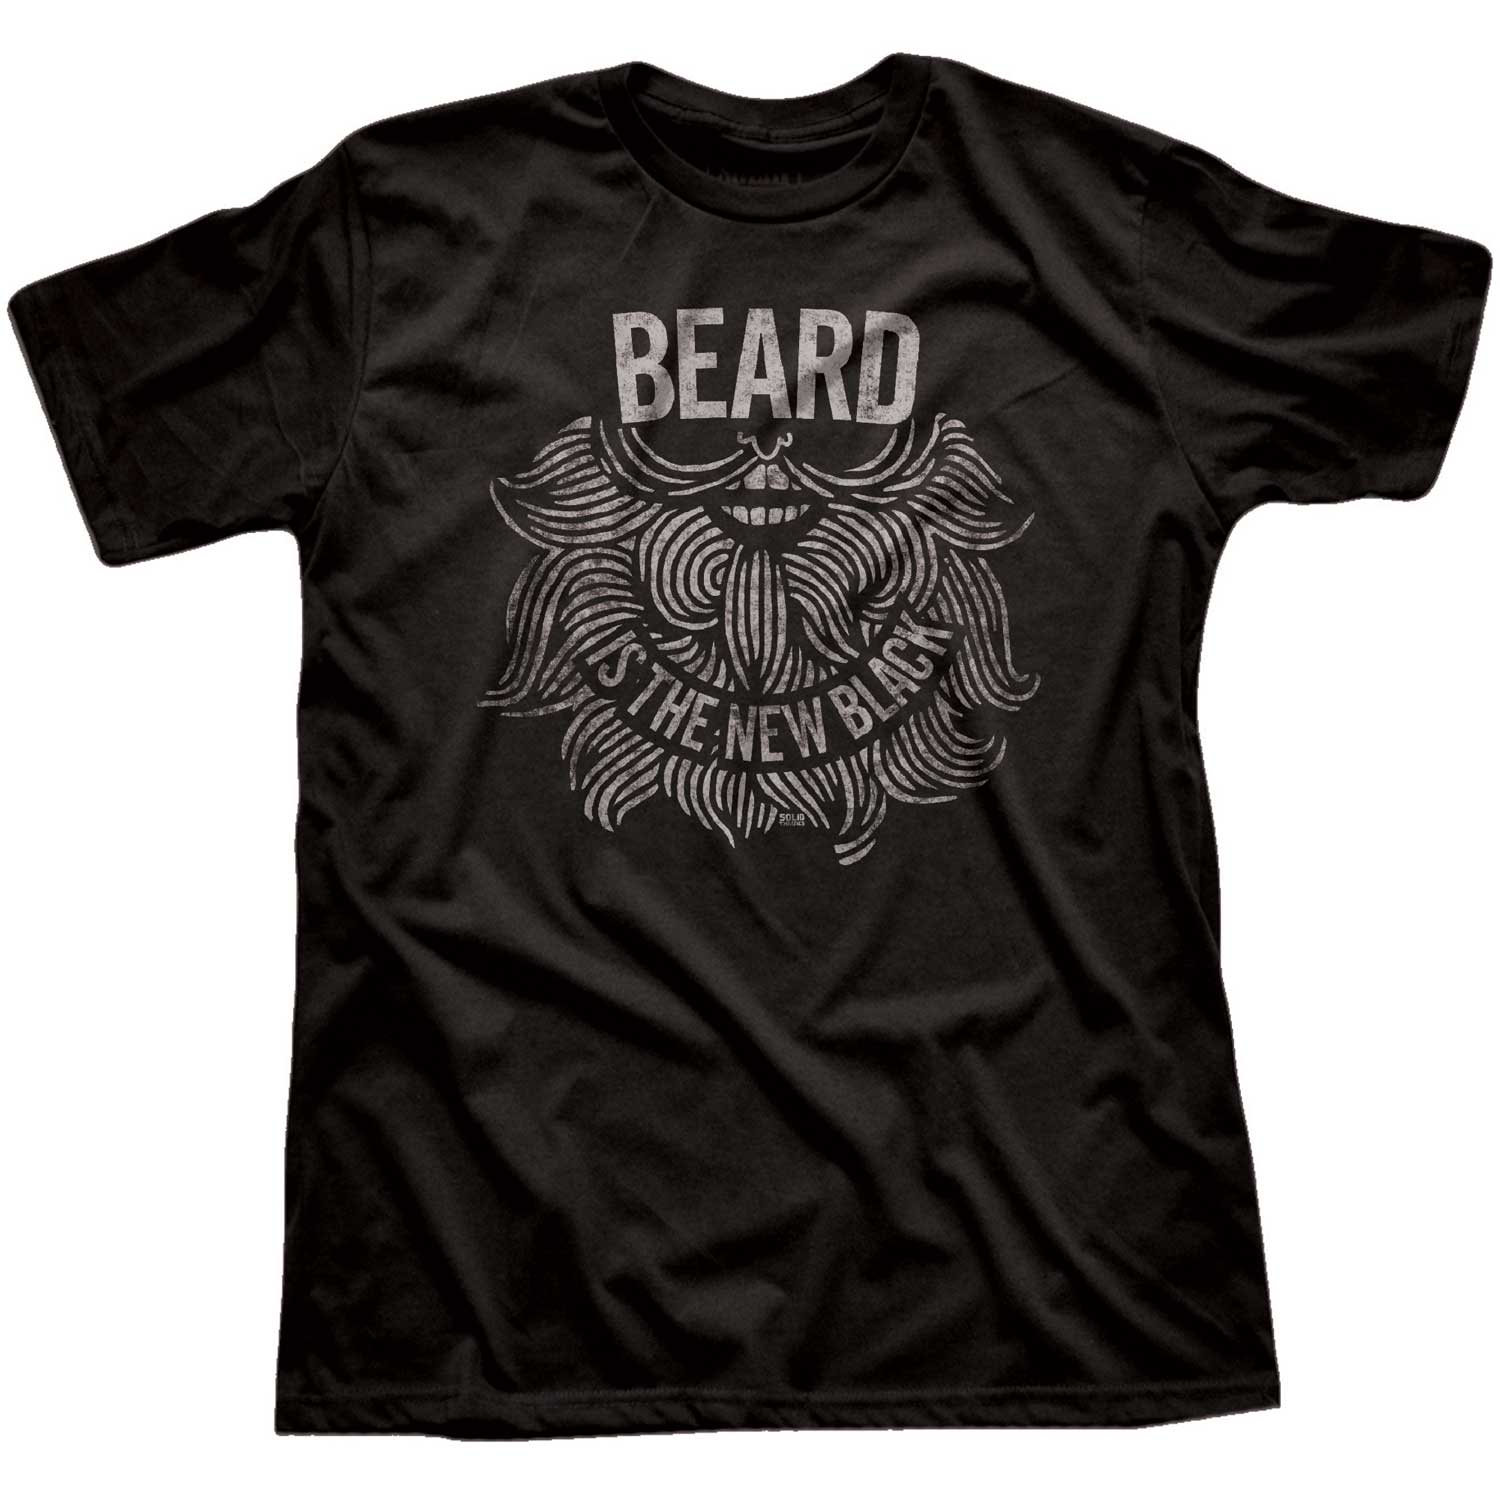 Men's Beard Is The New Black Vintage True Black Graphic T-Shirt | Funny Hipster Tee | Solid Threads